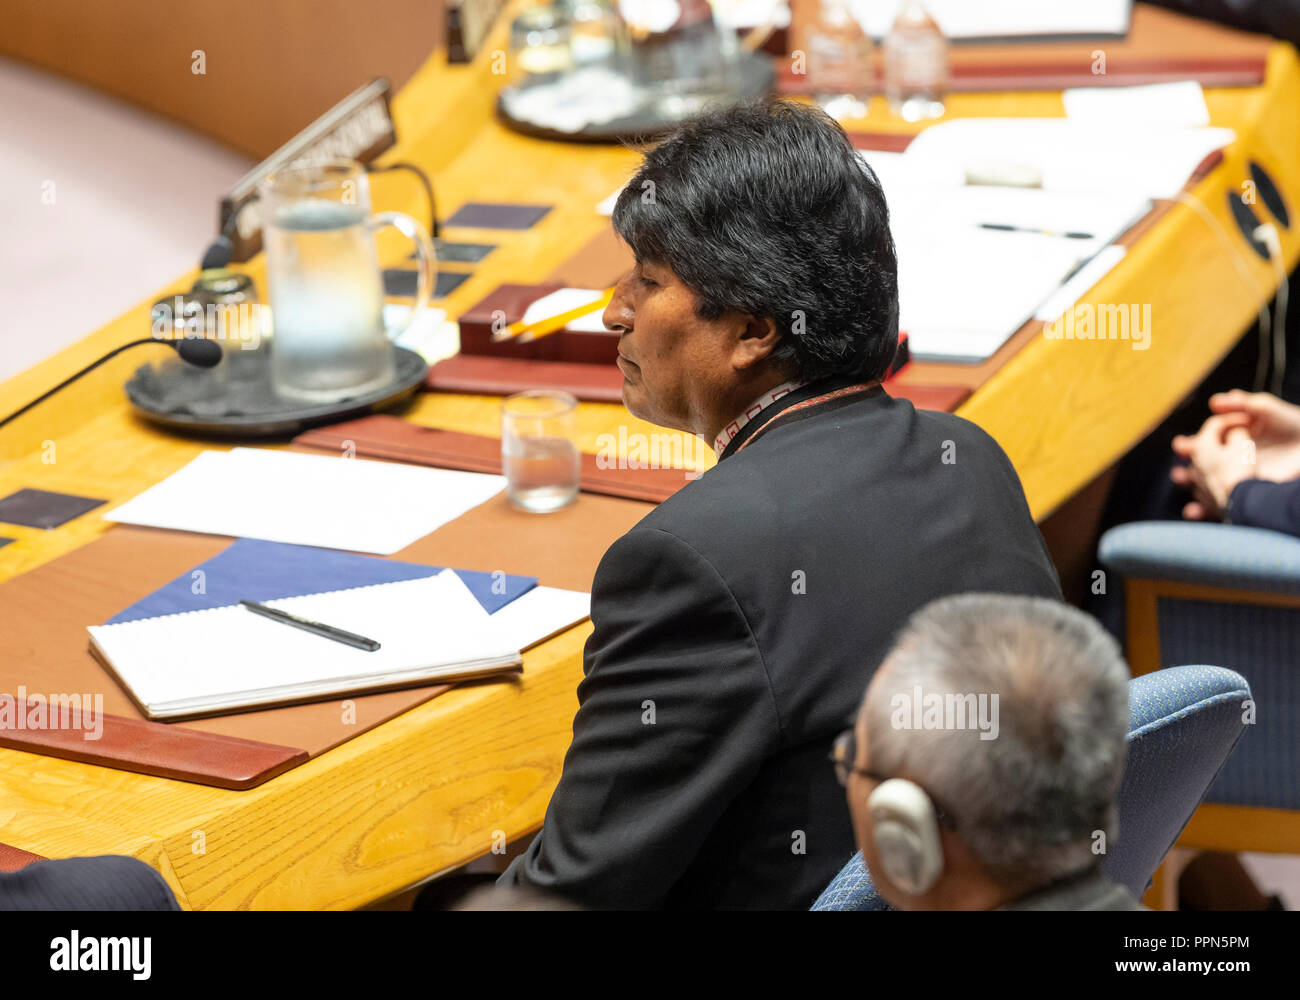 New York, USA - September 26, 2018: Bolivia President Evo Morales Ayma attends Security Council meeting on Non-proliferation of Weapons of Mass Destruction presided by President of US Donald Trump at United Nations Headquarters Credit: lev radin/Alamy Live News Stock Photo